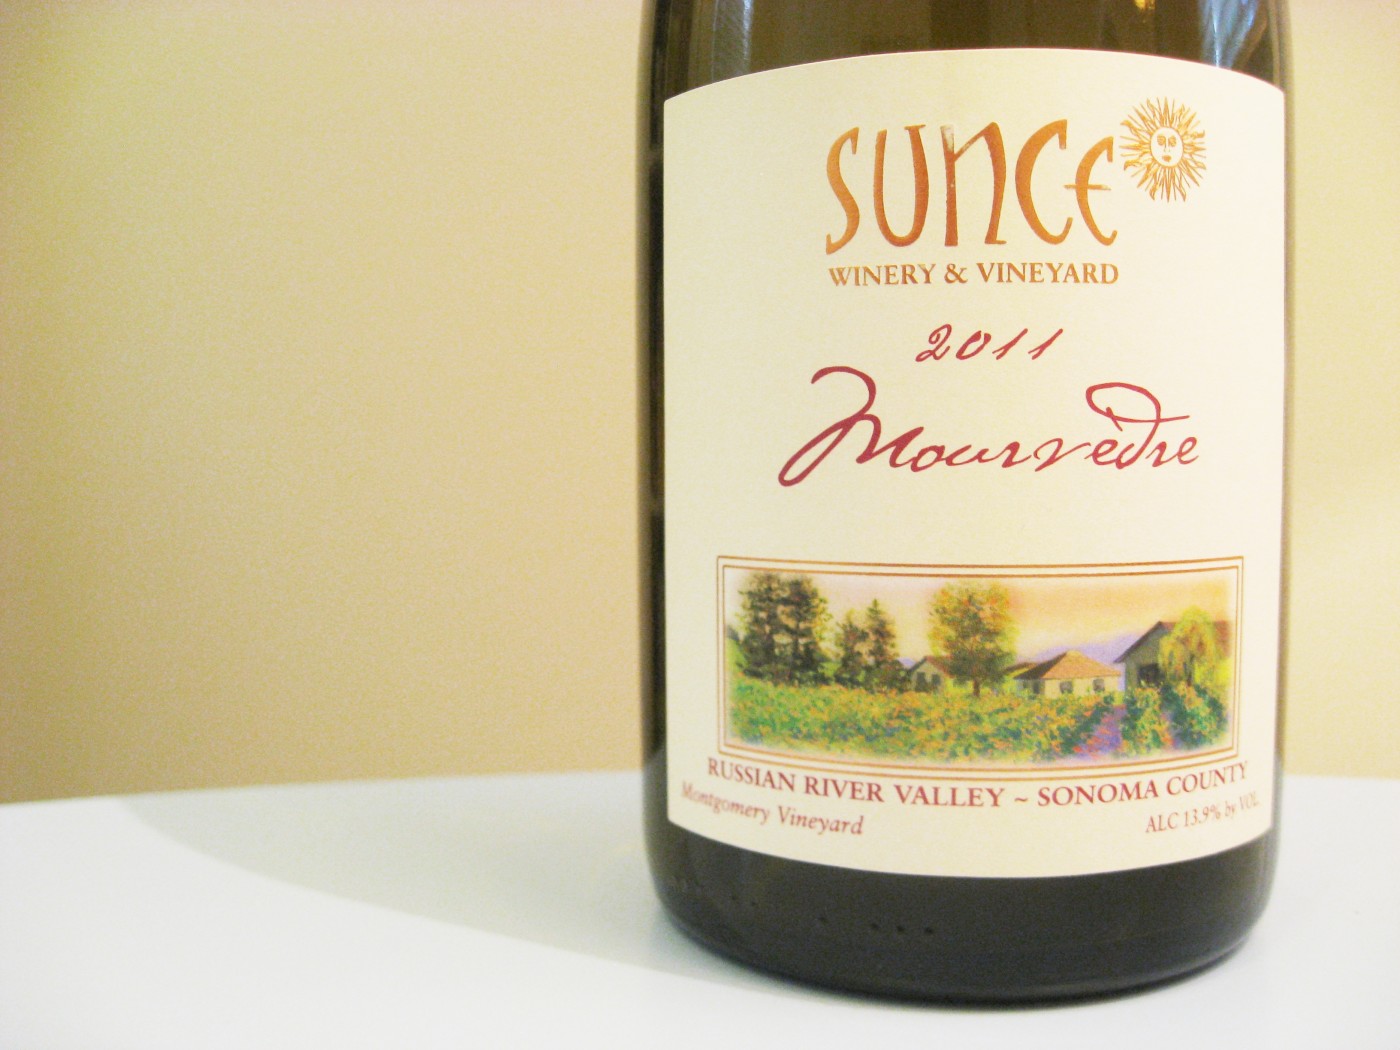 Sunce Winery & Vineyard, Mourvedre 2011, Montgomery Vineyard, Russian River Valley, Sonoma County, California, Wine Casual